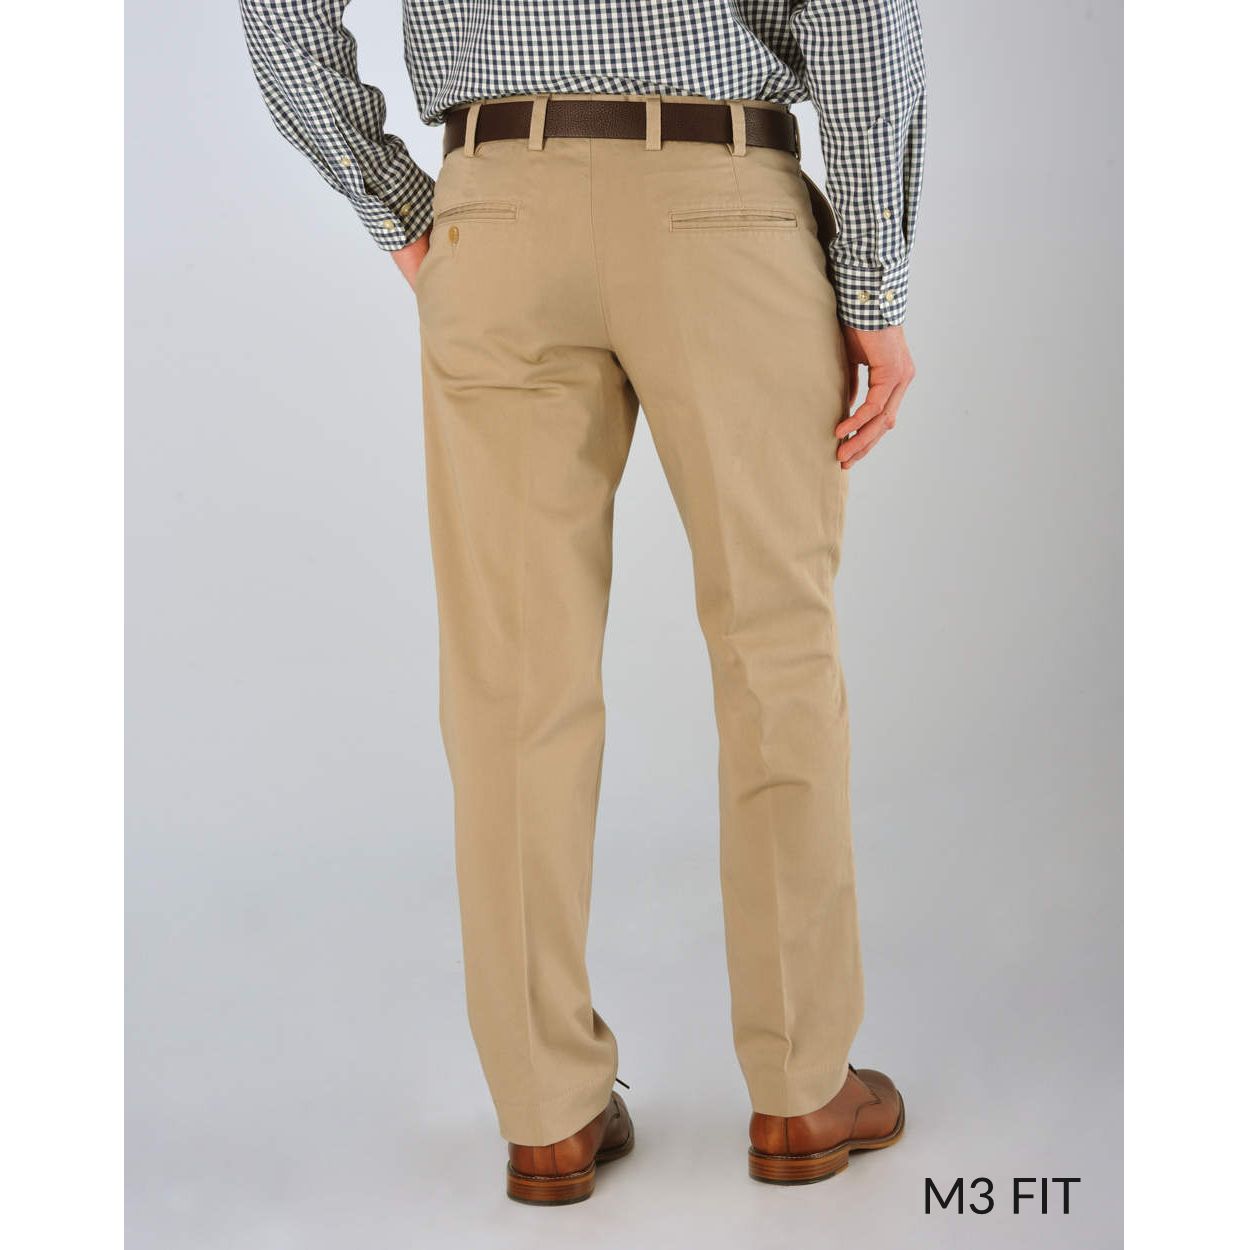 M3 Straight Fit Vintage Twills in Stone by Bills Khakis